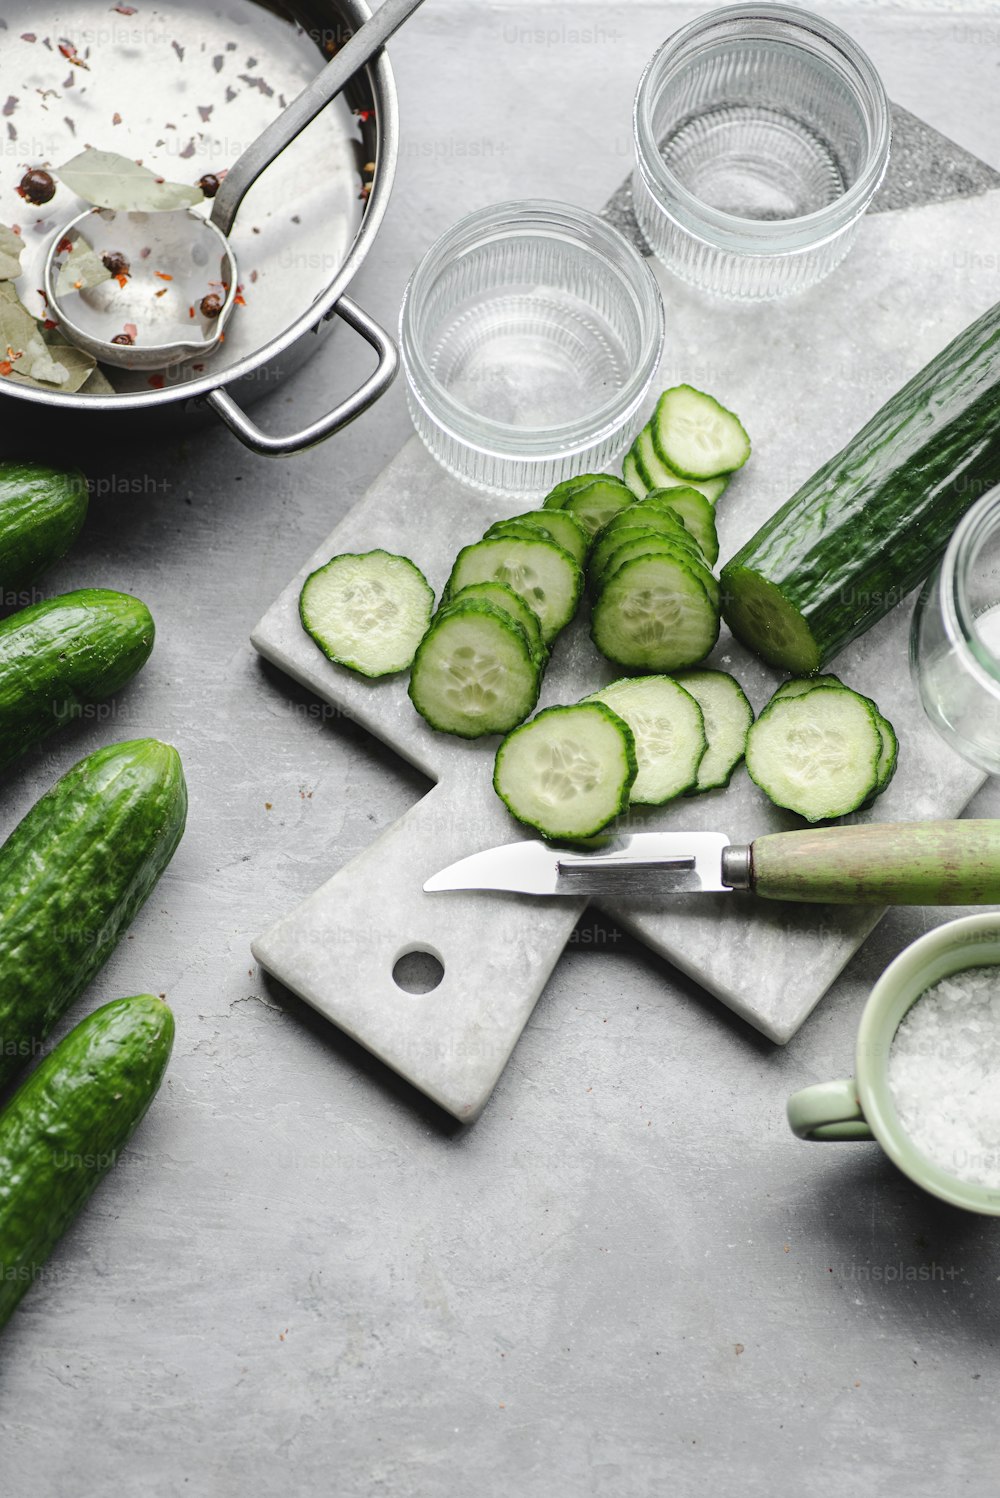 a cutting board topped with cucumbers and a knife